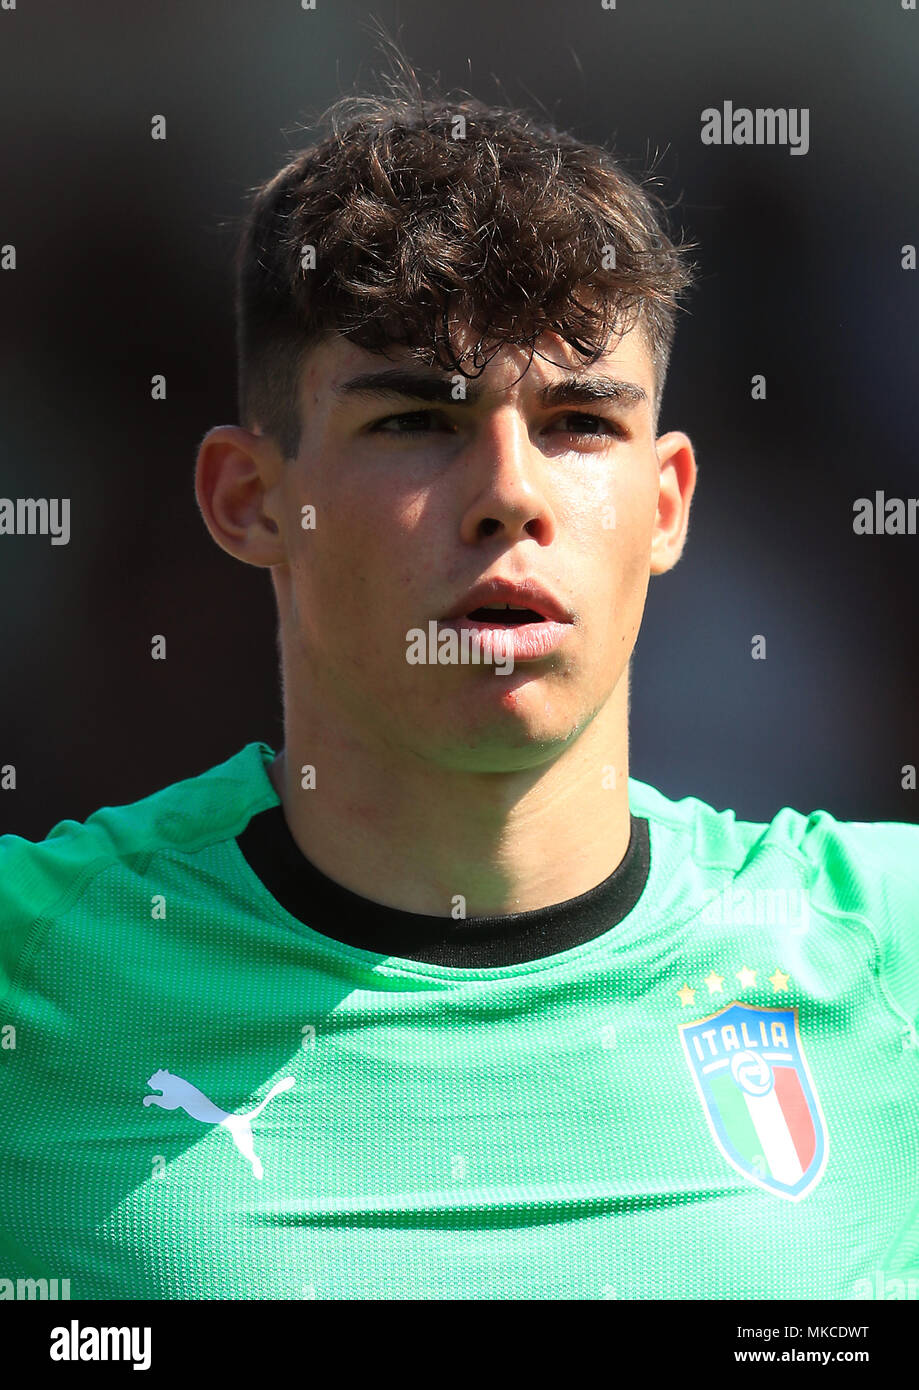 Italy U17 goalkeeper Alessandro Russo during the UEFA European U17 Championship, Group A match at Banks's Stadium, Walsall. PRESS ASSOCIATION Photo. Picture date: Monday May 7, 2018. See PA story SOCCER England U17. Photo credit should read: Mike Egerton/PA Wire. RESTRICTIONS: Editorial use only. No commercial use. Stock Photo